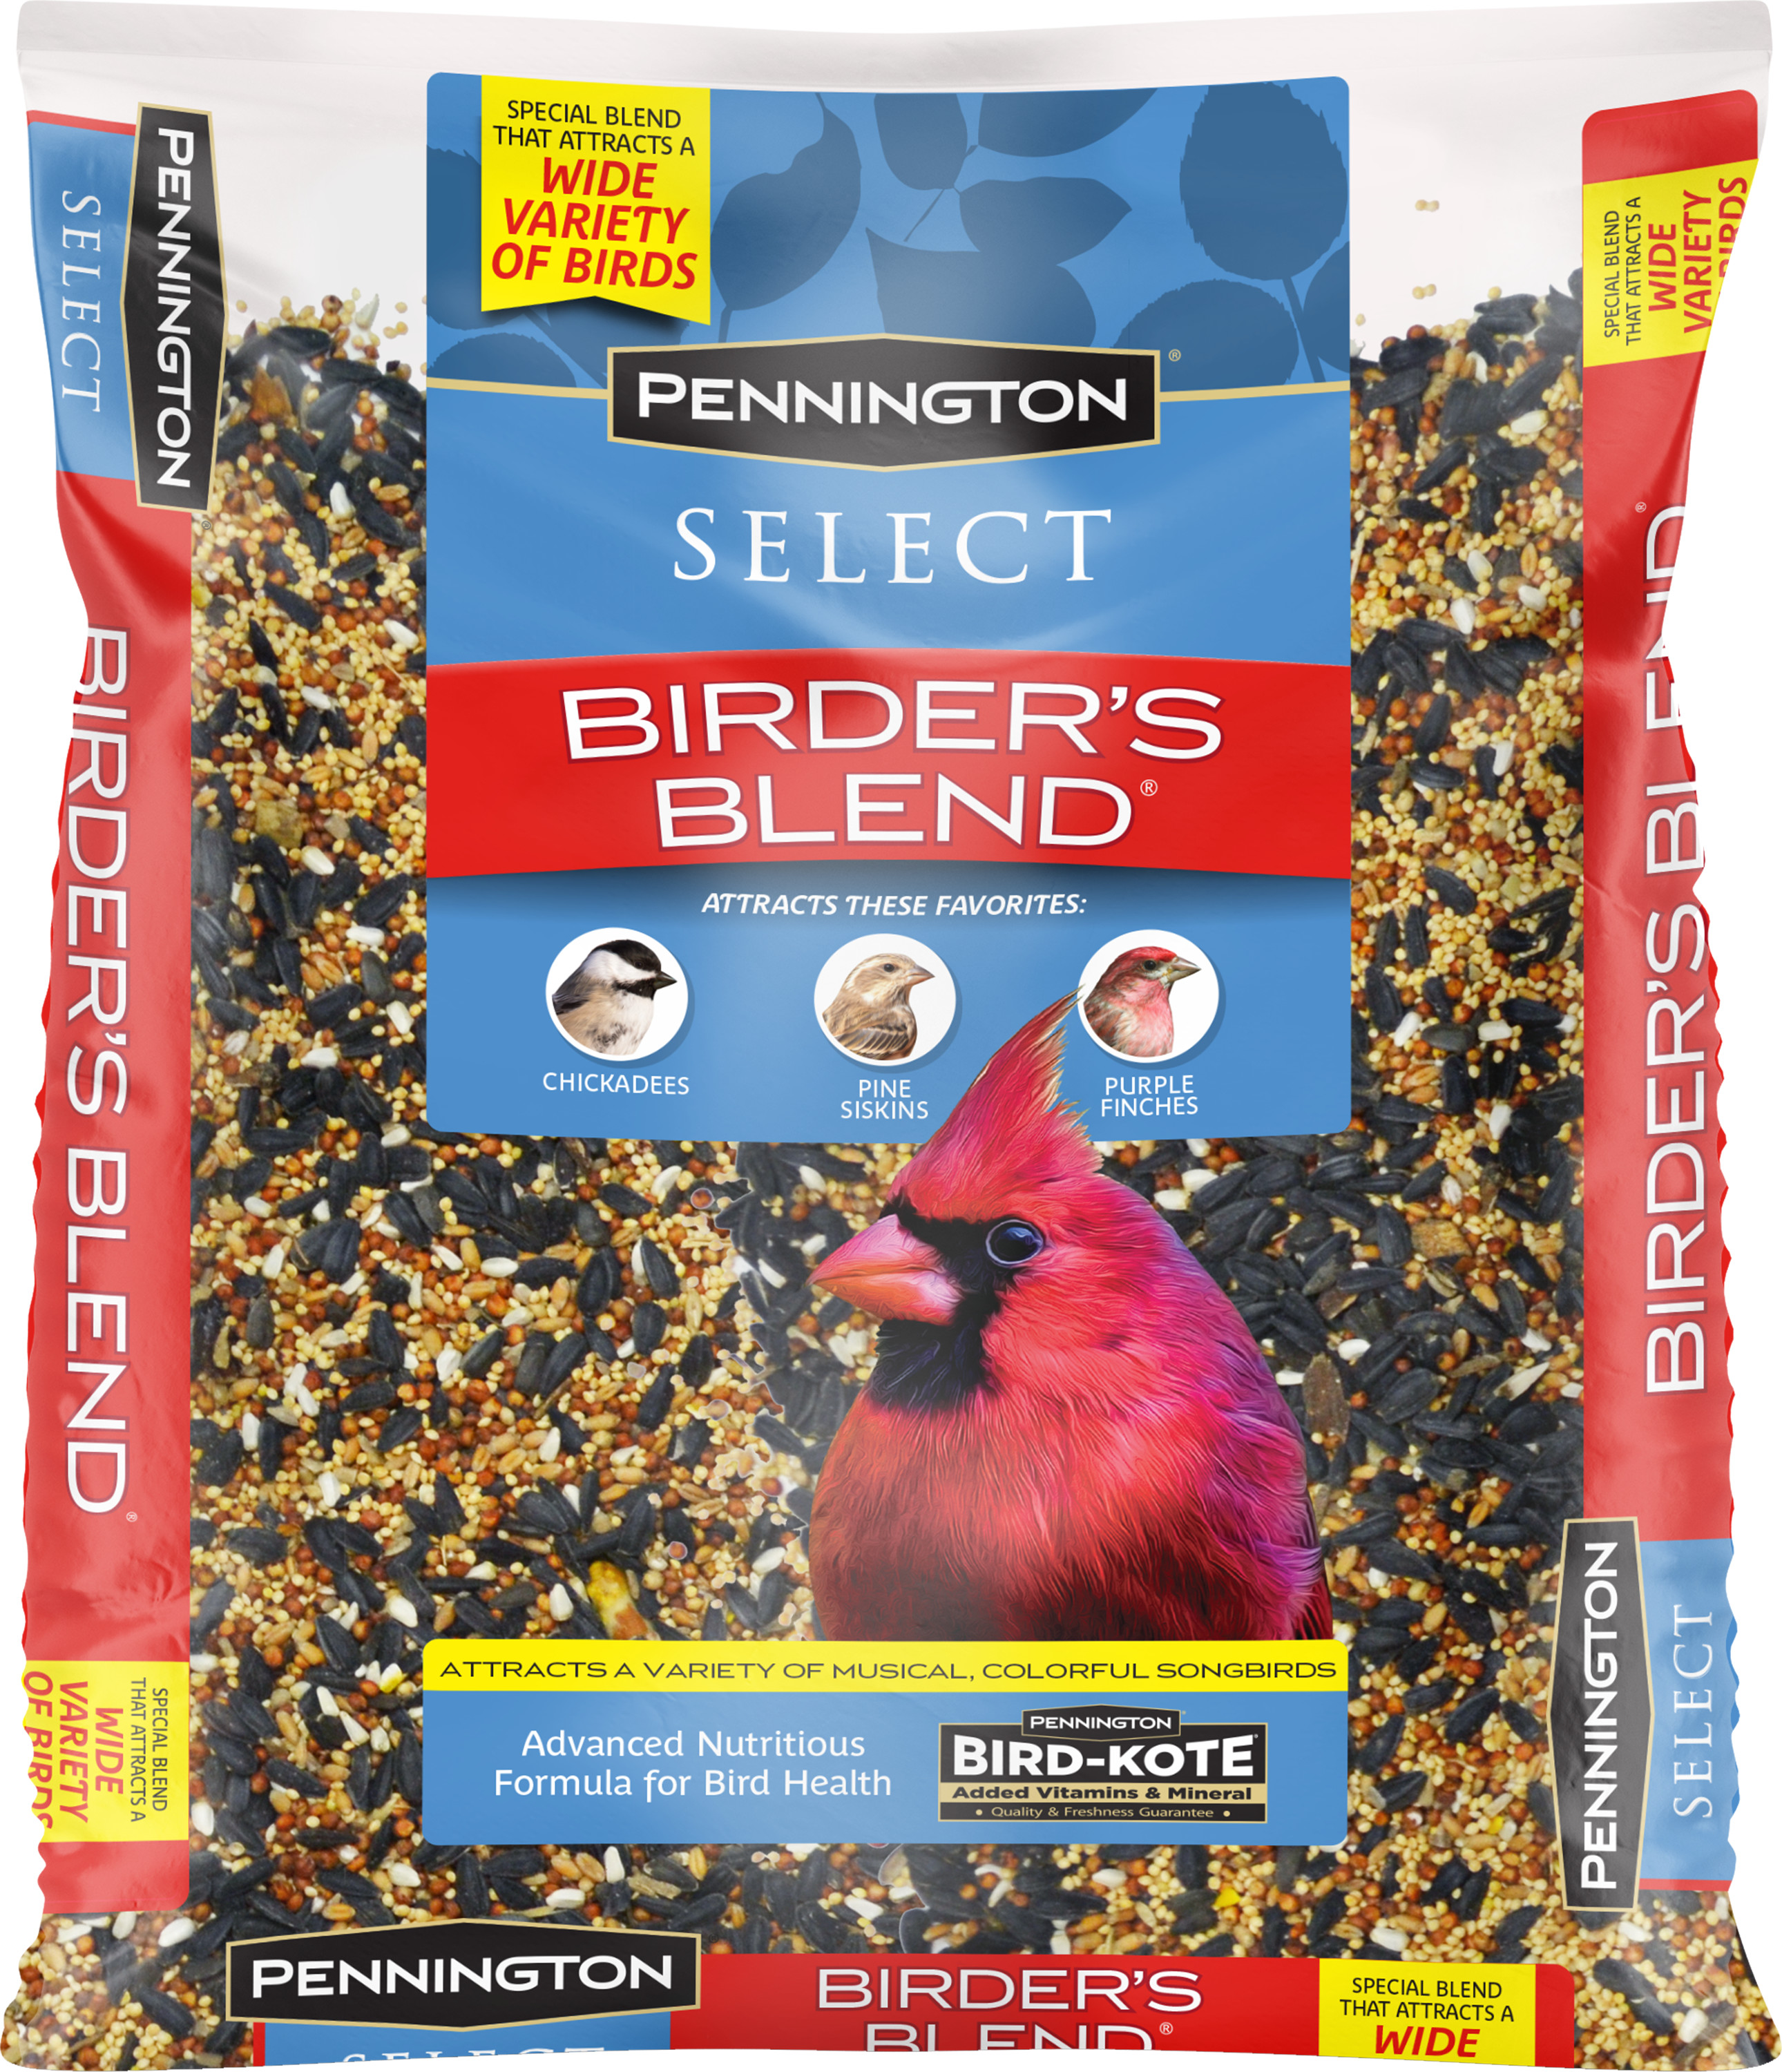 Pennington Select Birder's Blend, Wild Bird Seed and Feed, 14 lb. Bag, 1 Pack, Dry - image 1 of 9